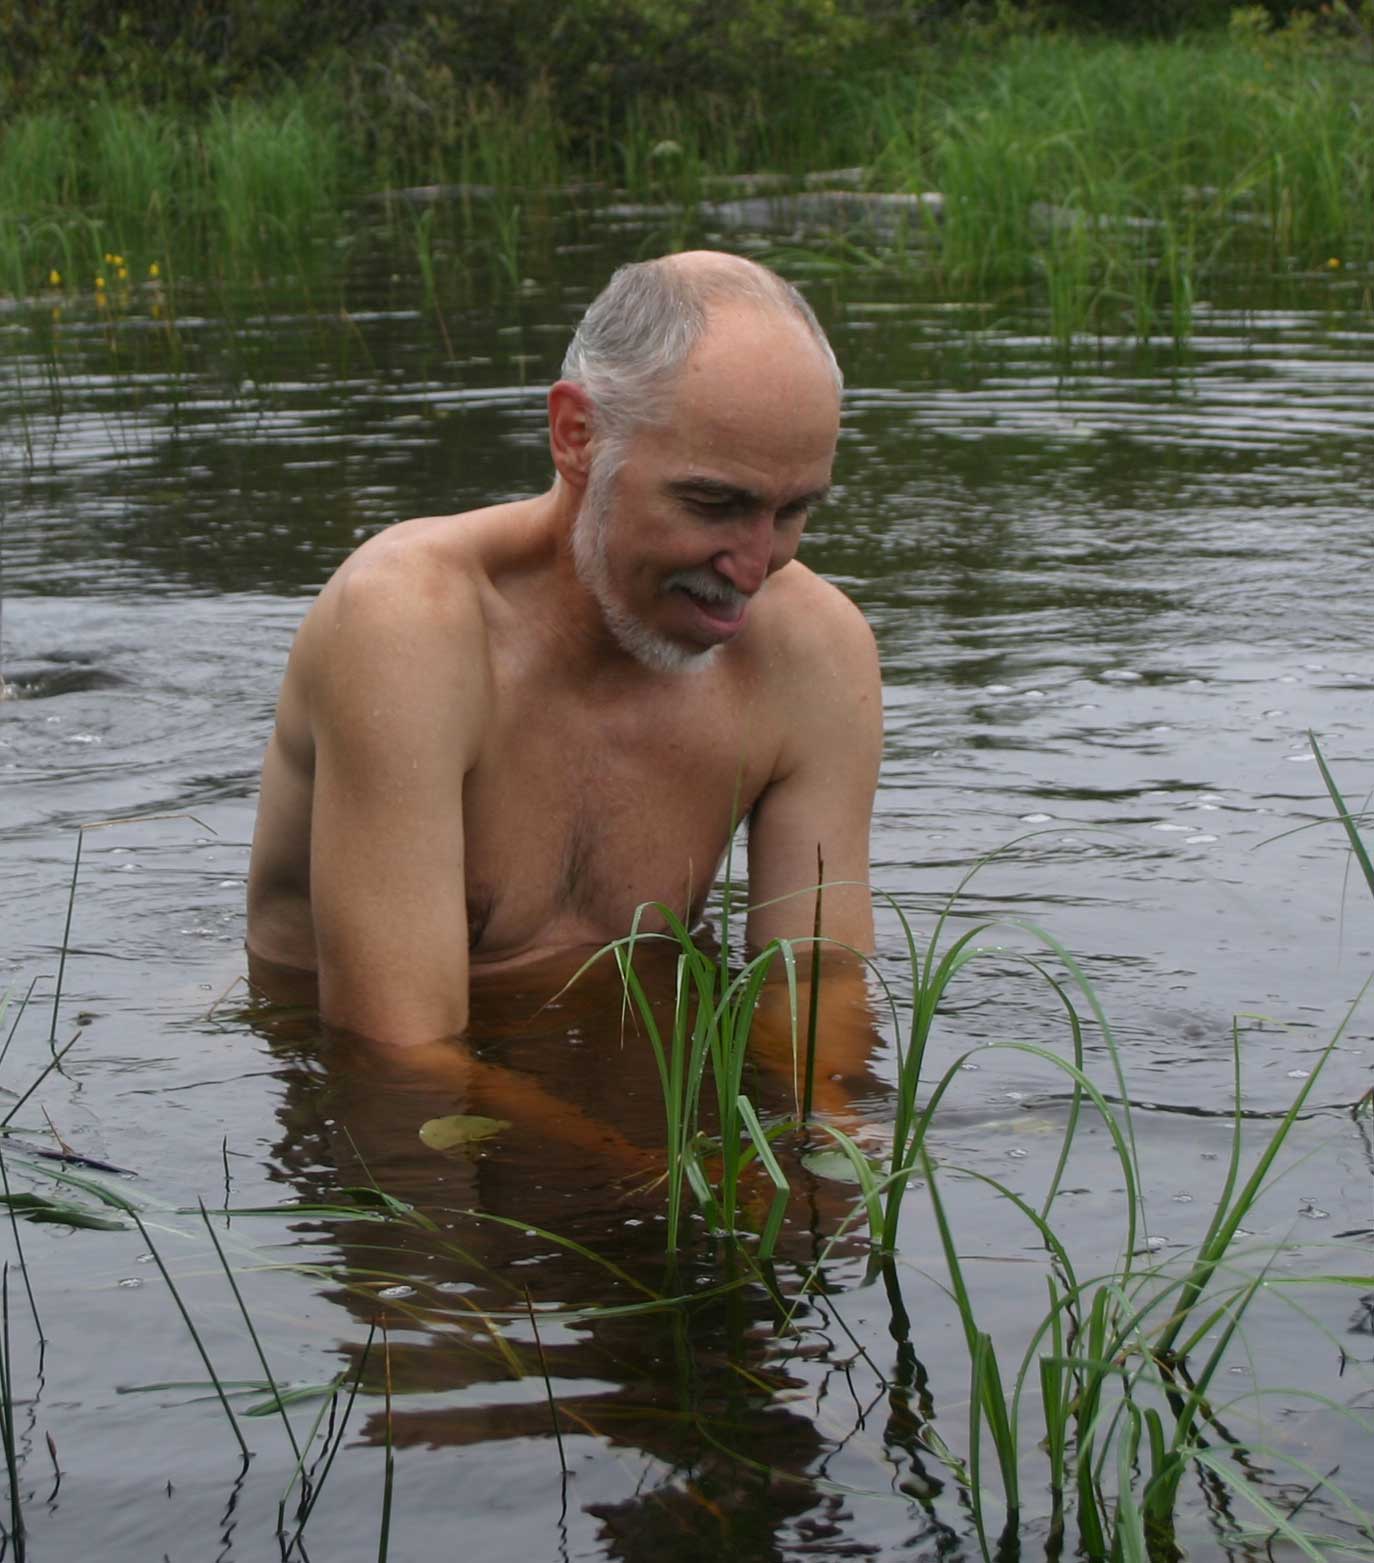 A shirtless man in water up to his mid-torso, with his hands underwater selecting an aquatic plant.